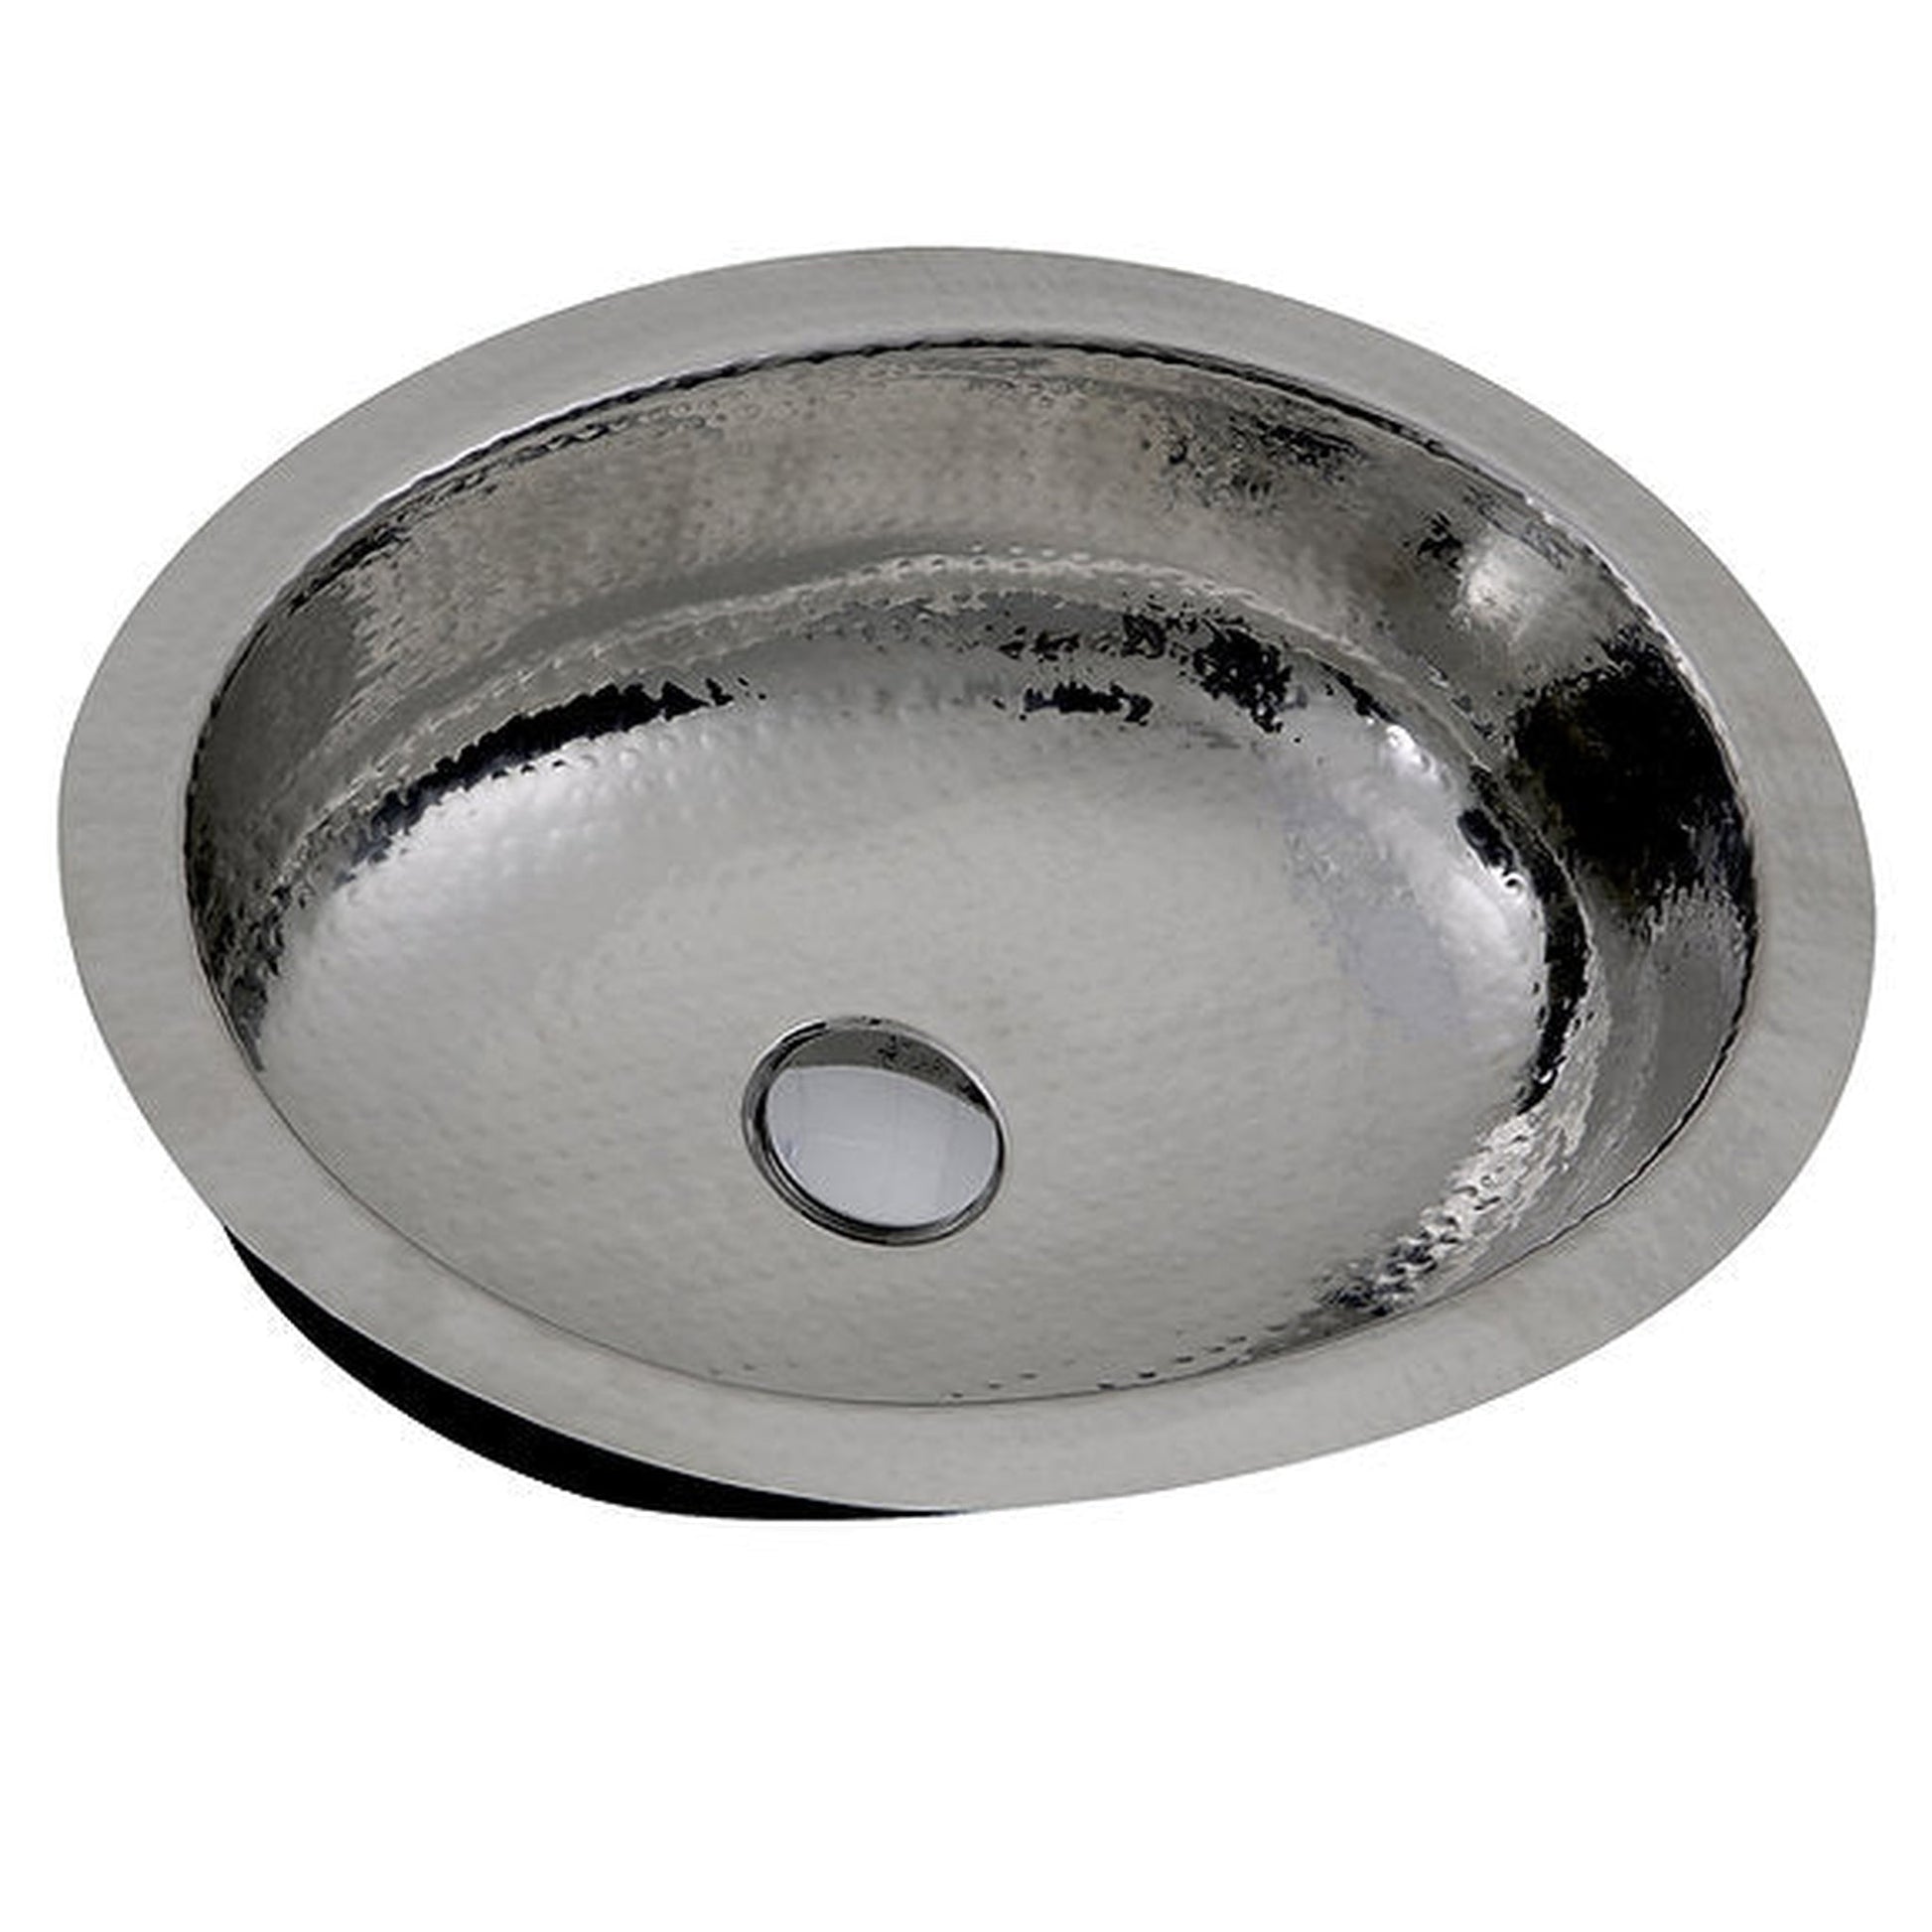 Nantucket Sinks Brightwork Home 18" W x 14" D Hand Hammered Oval Polished Stainless Steel Undermount Sink With Overflow